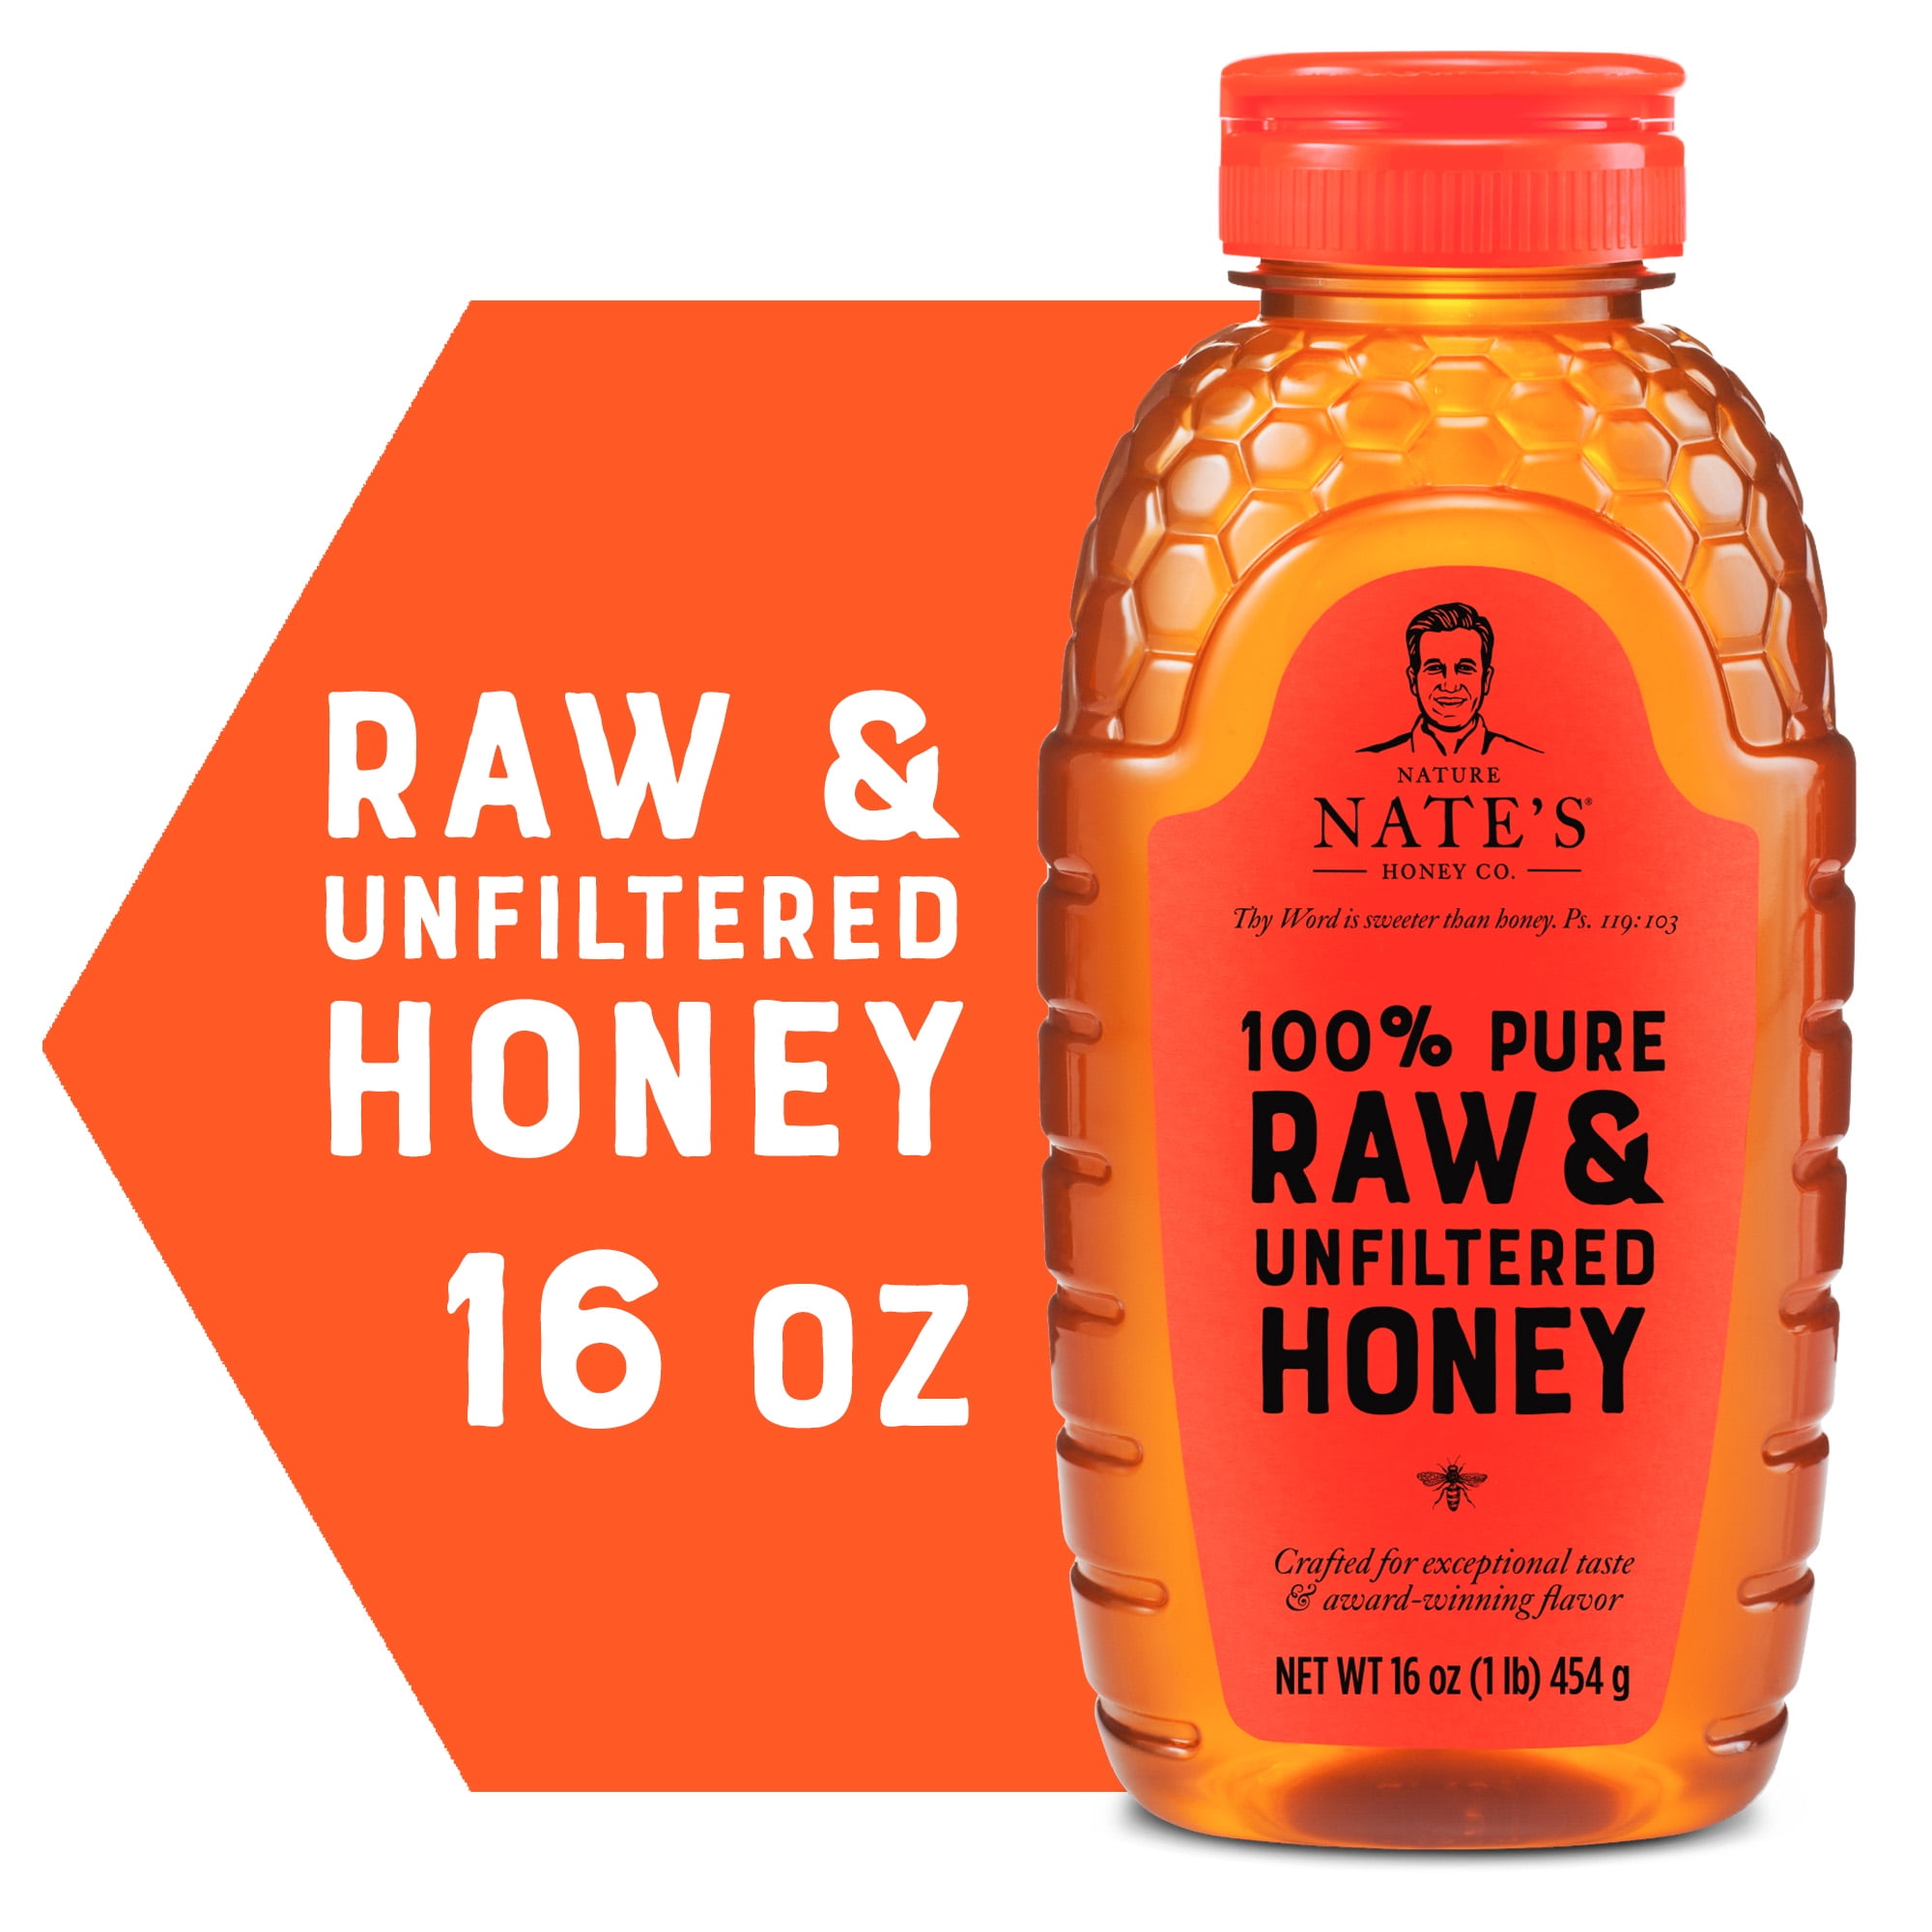 Nature Nate's Honey: 100% Pure, Raw and Unfiltered Honey - 16 fl oz